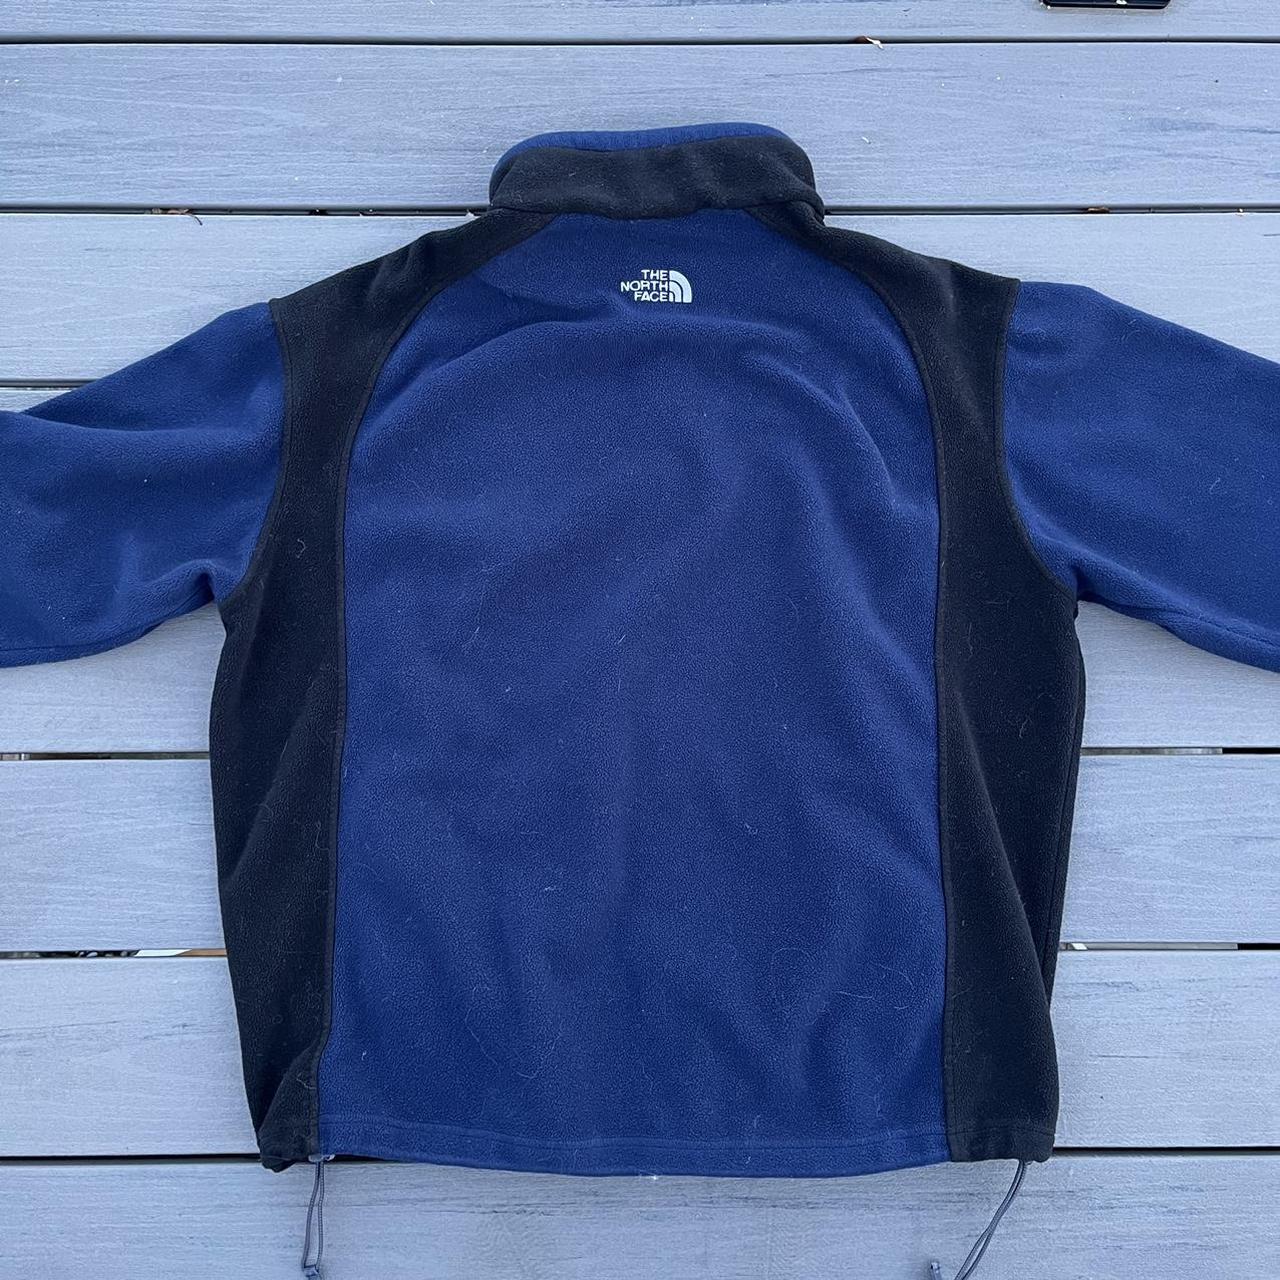 The North Face Men's Navy Jacket (3)